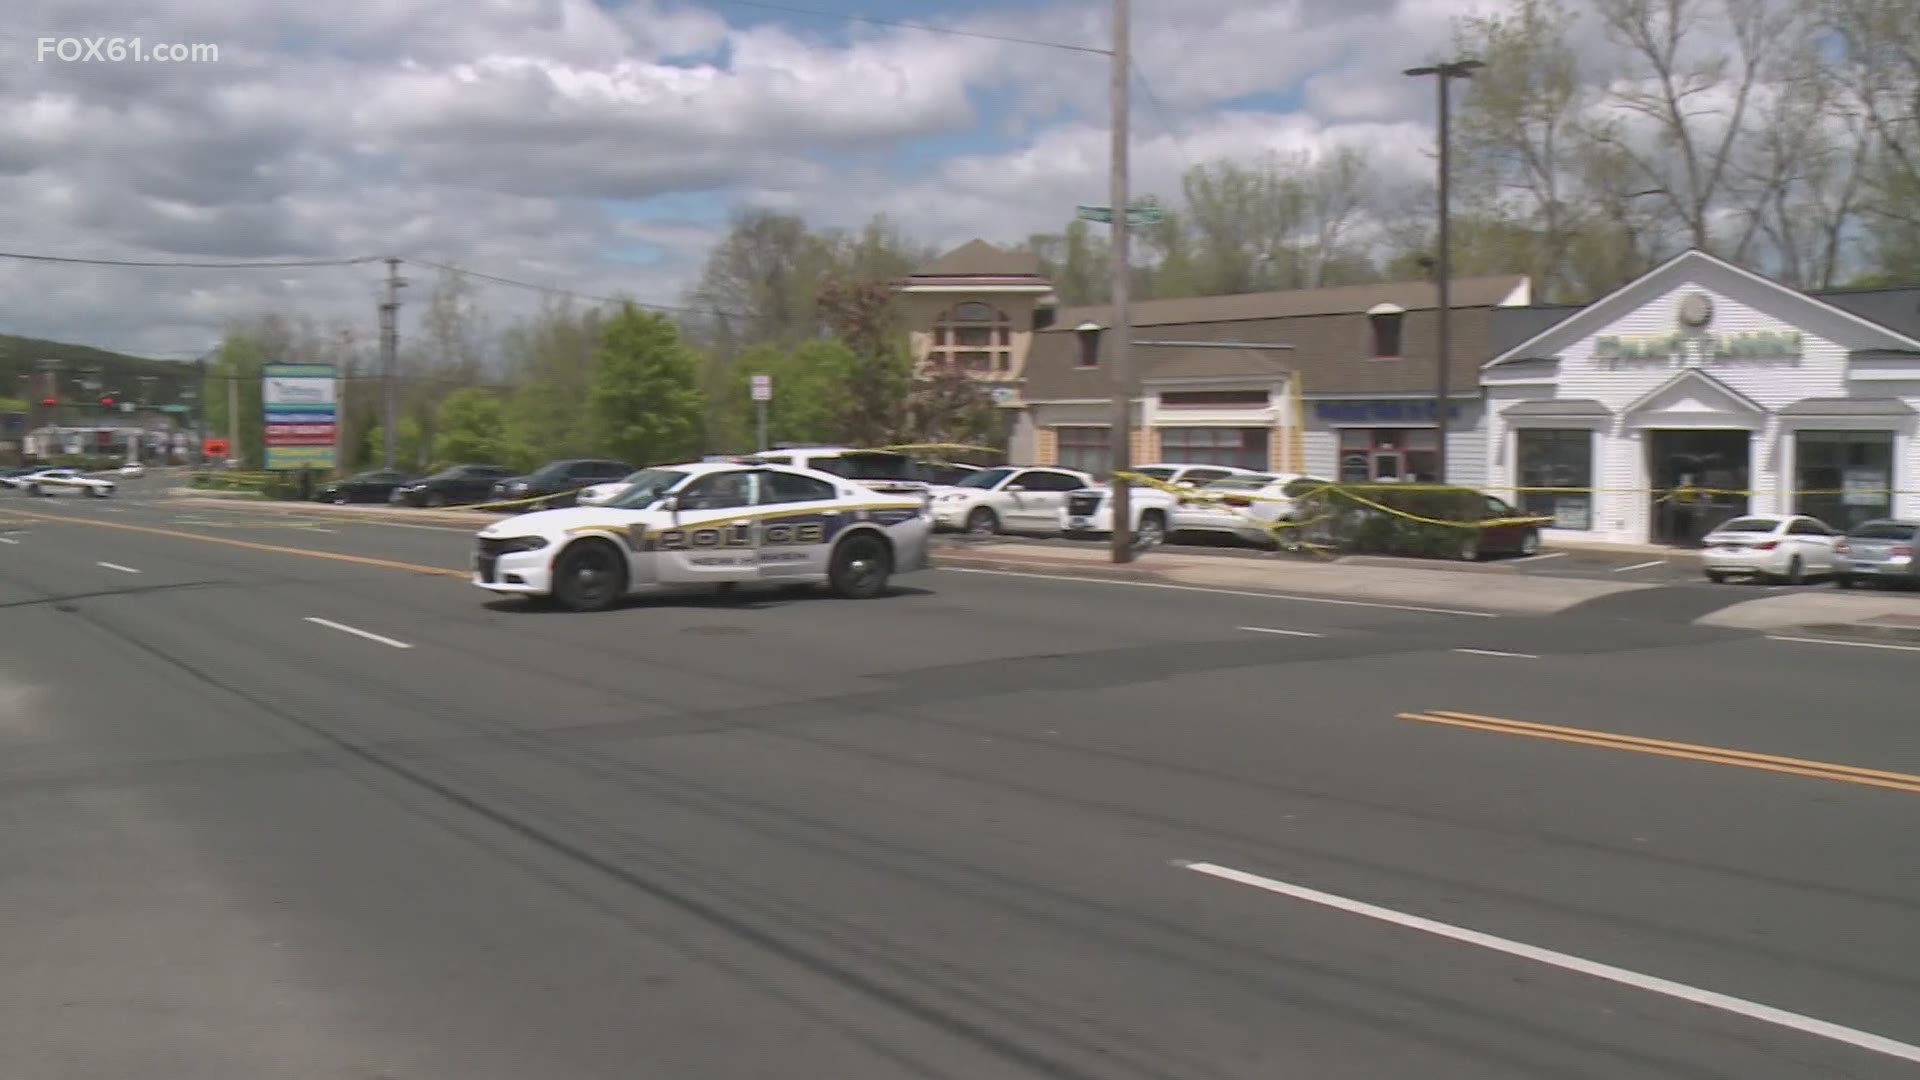 Officials said a pedestrian was crossing Whalley Avenue at the intersection when he was struck by a 2008 Ford Taurus.